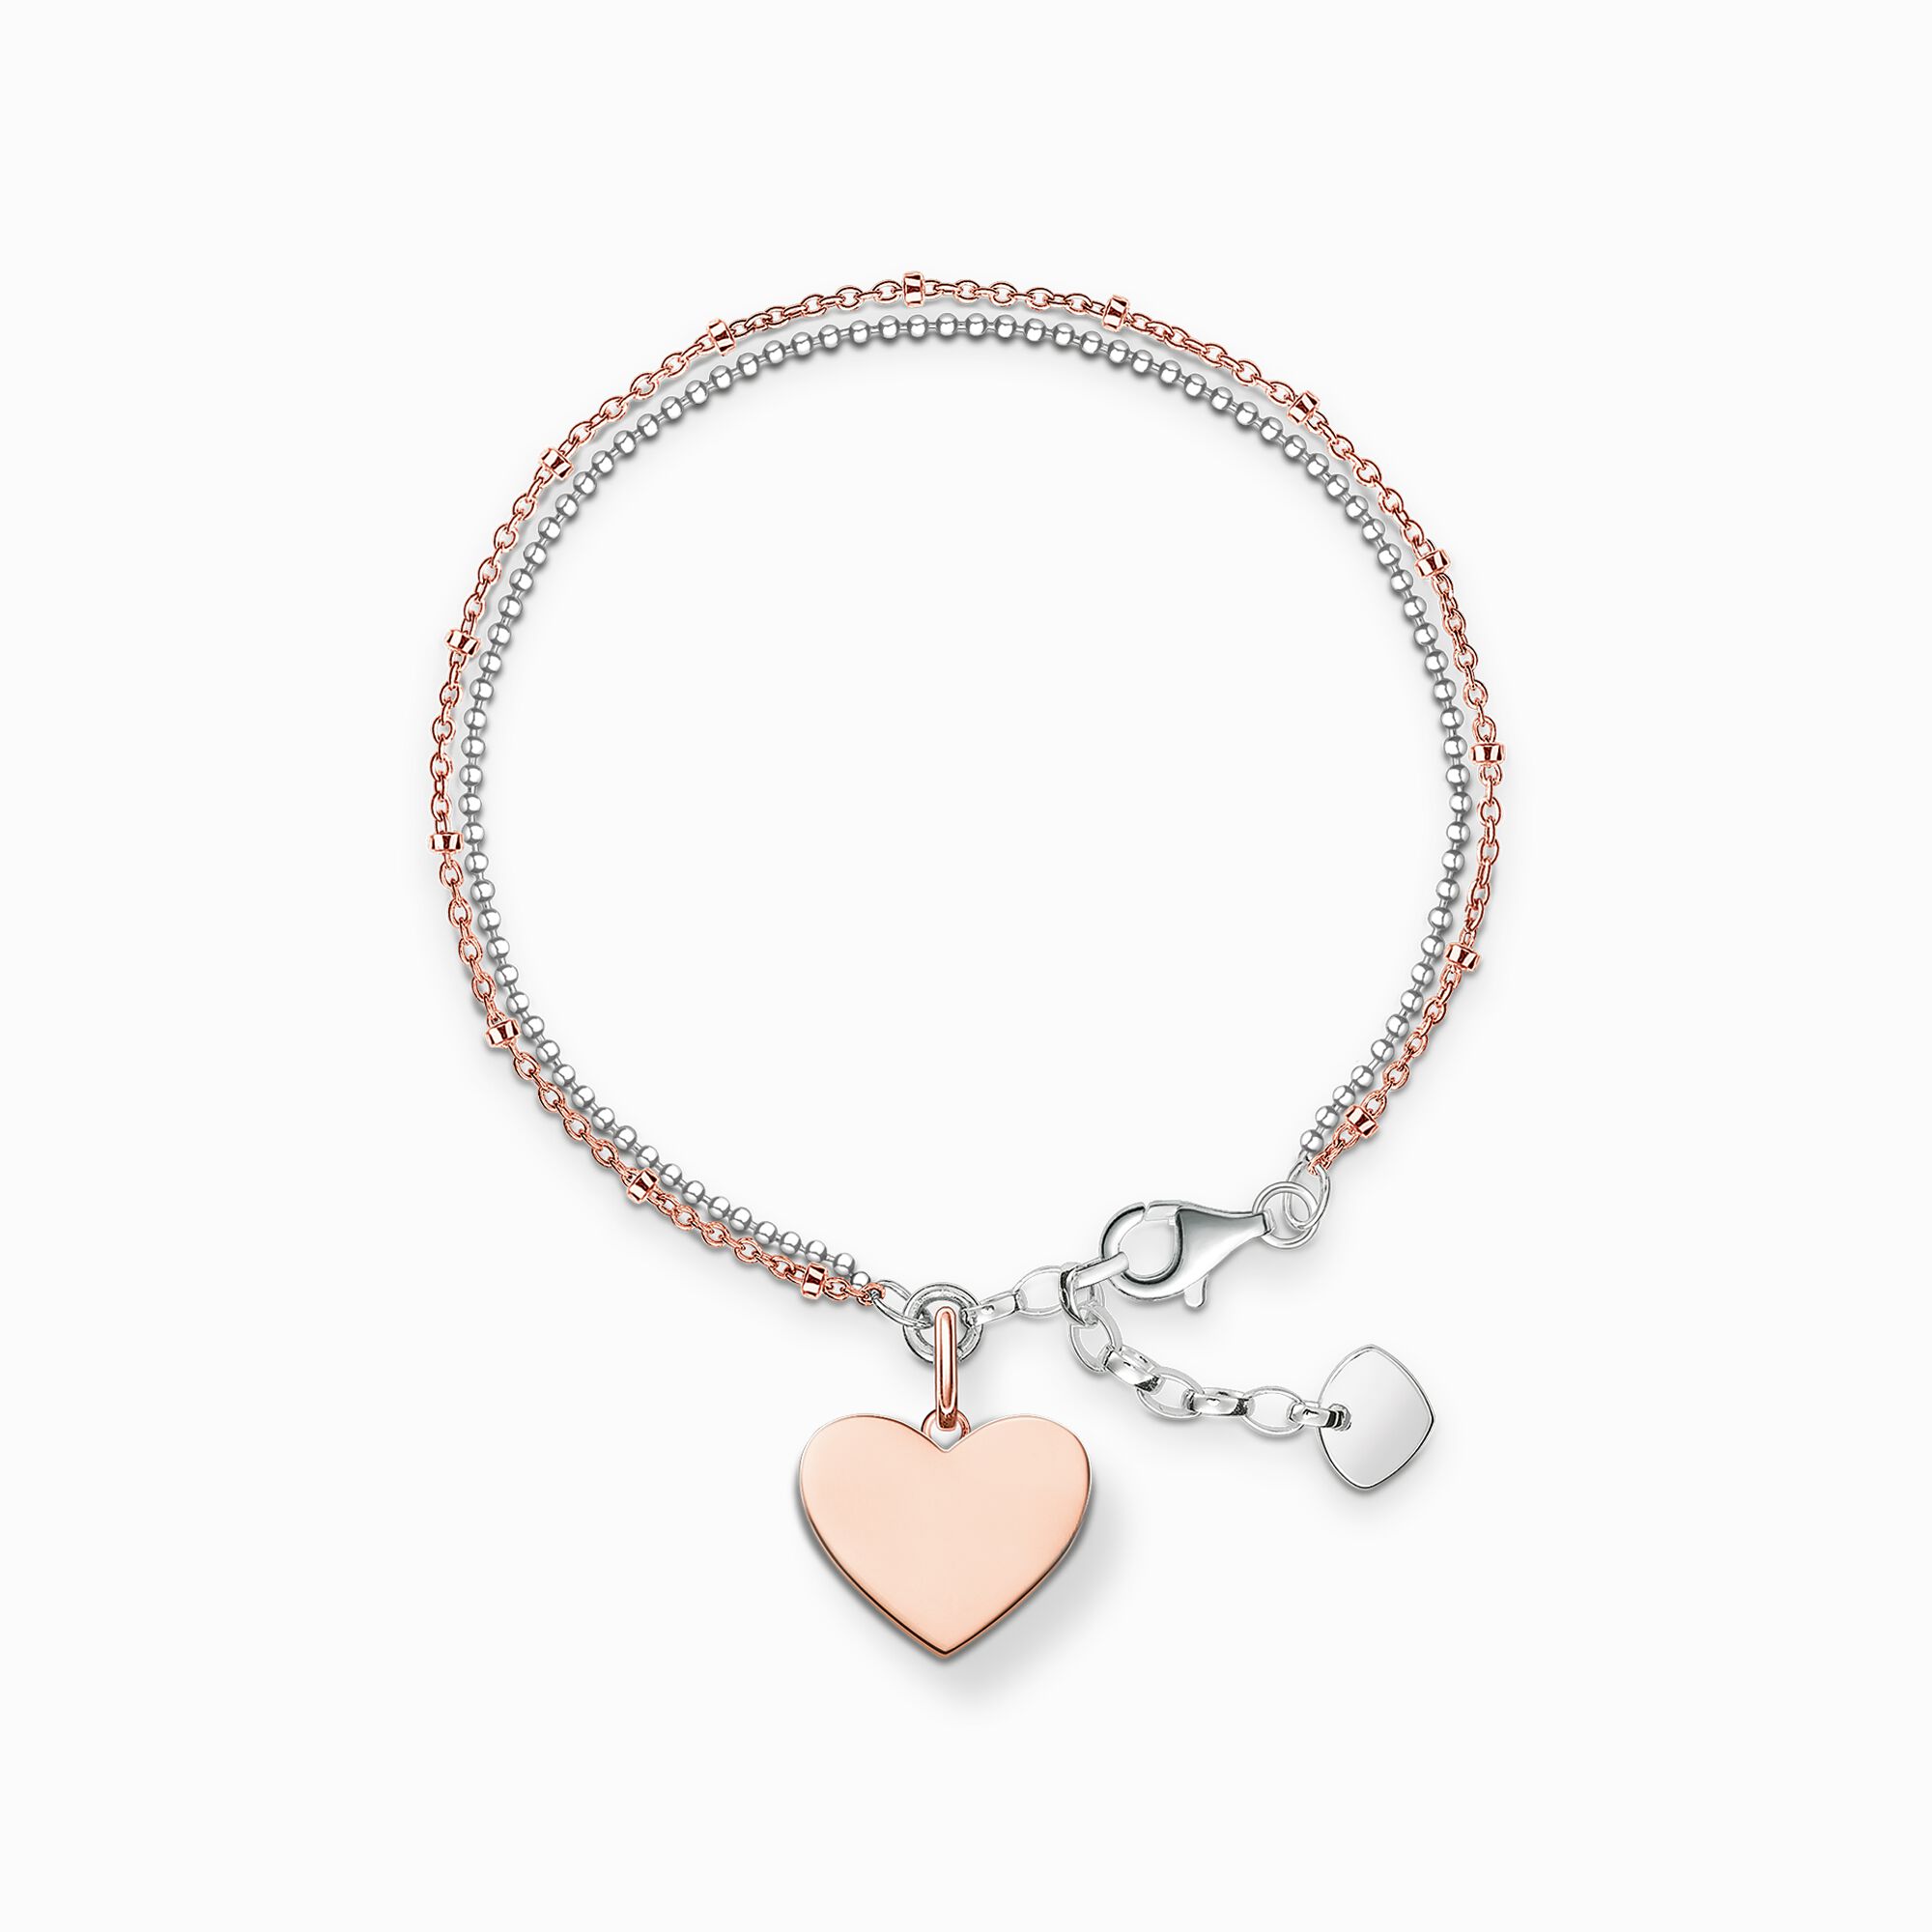 Bracelet heart rose gold silver from the  collection in the THOMAS SABO online store